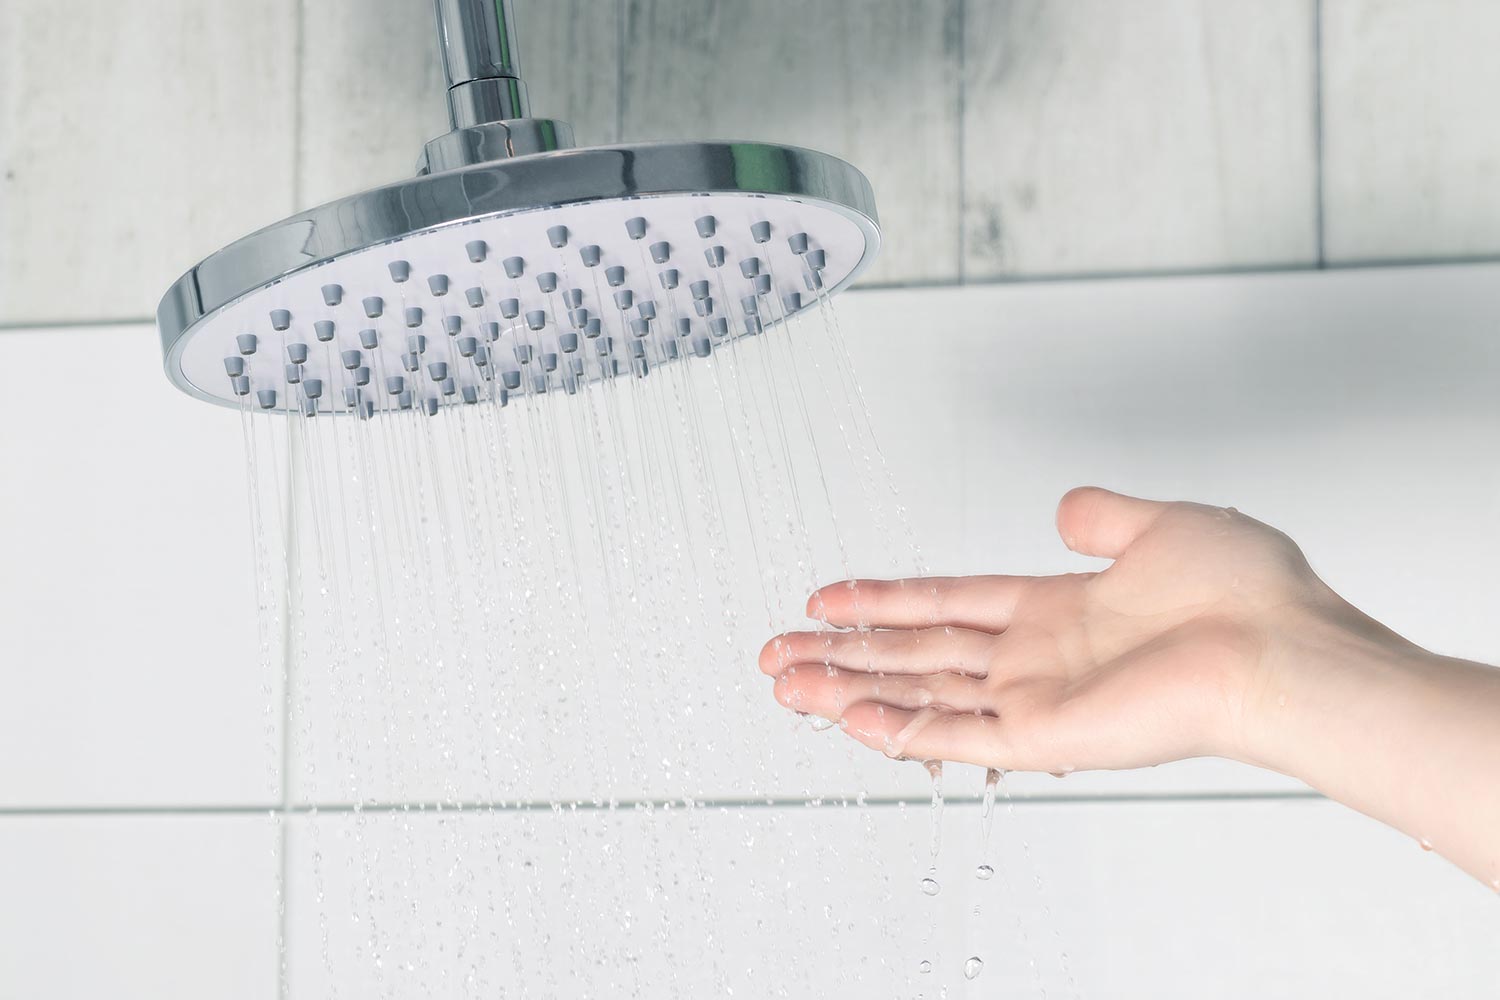 Hand touching water pouring from a rain shower head to check water temperature